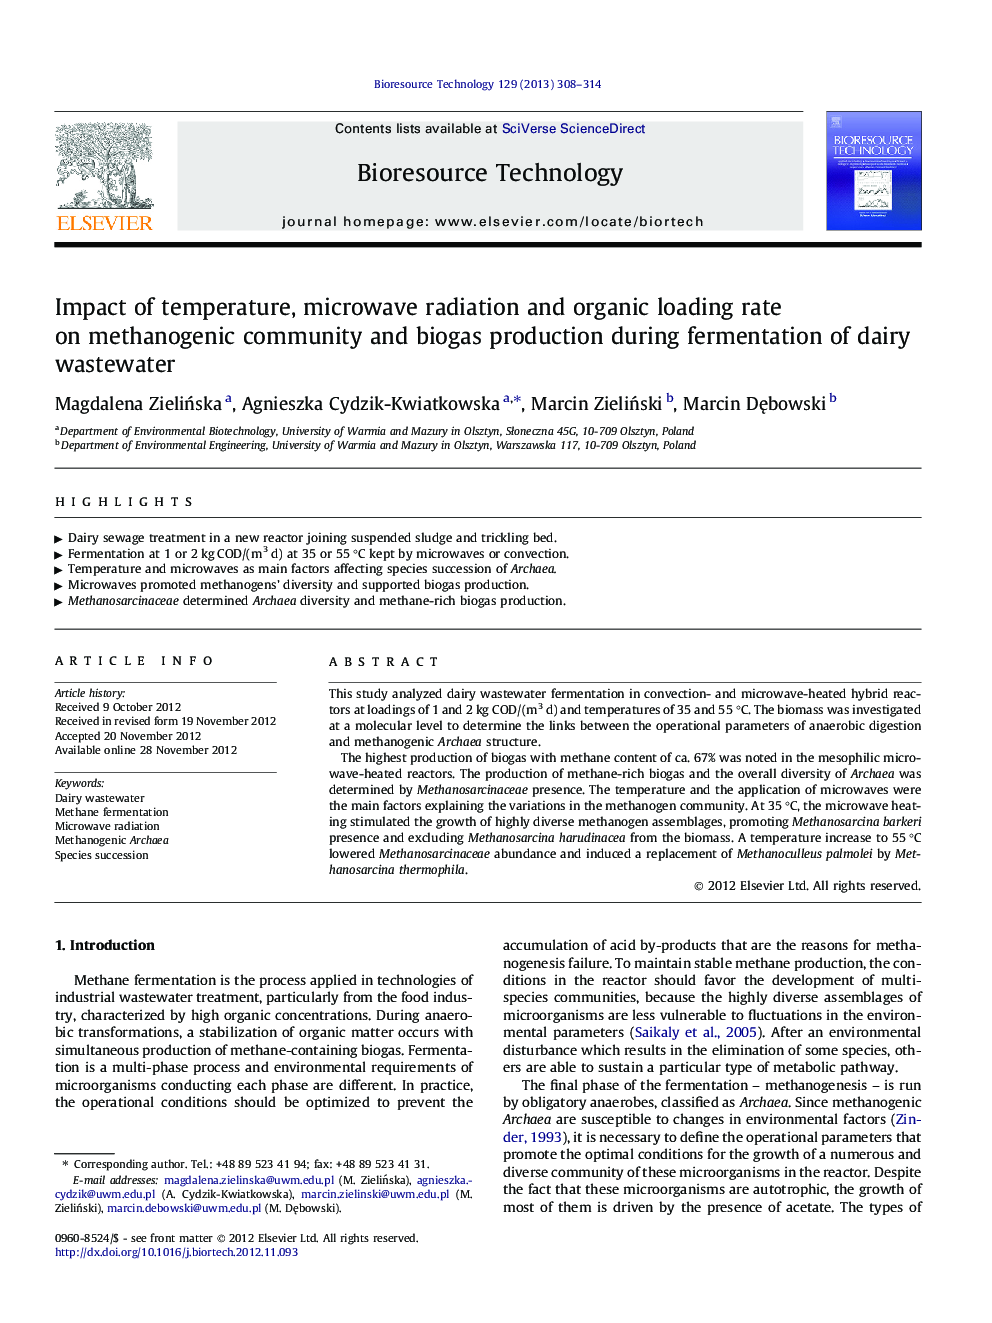 Impact of temperature, microwave radiation and organic loading rate on methanogenic community and biogas production during fermentation of dairy wastewater